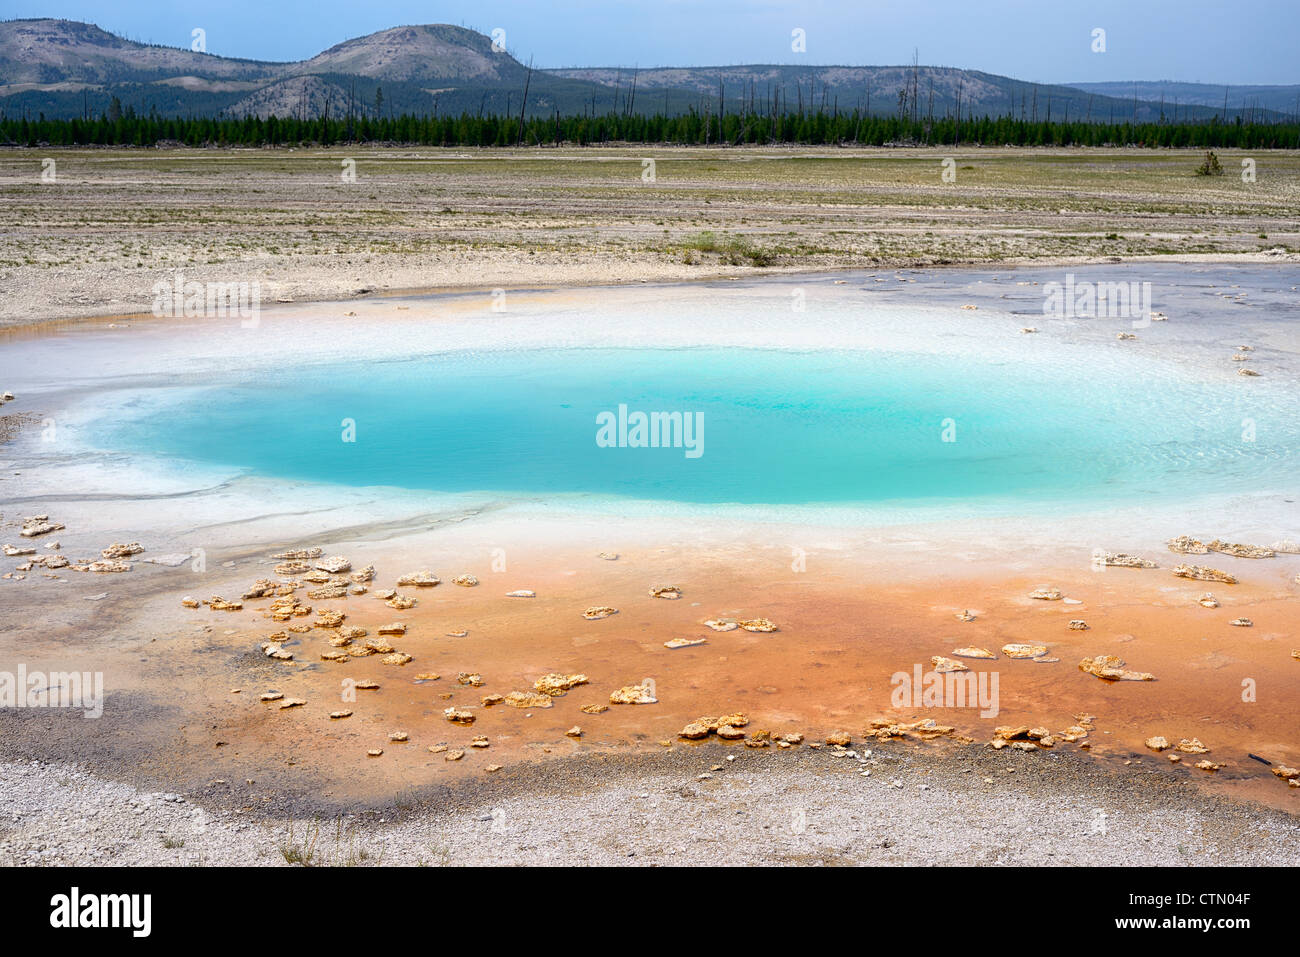 Opal pool and abstract patterns in mud, Midway Geyser Basin, Yellowstone National Park, Wyoming, USA Stock Photo